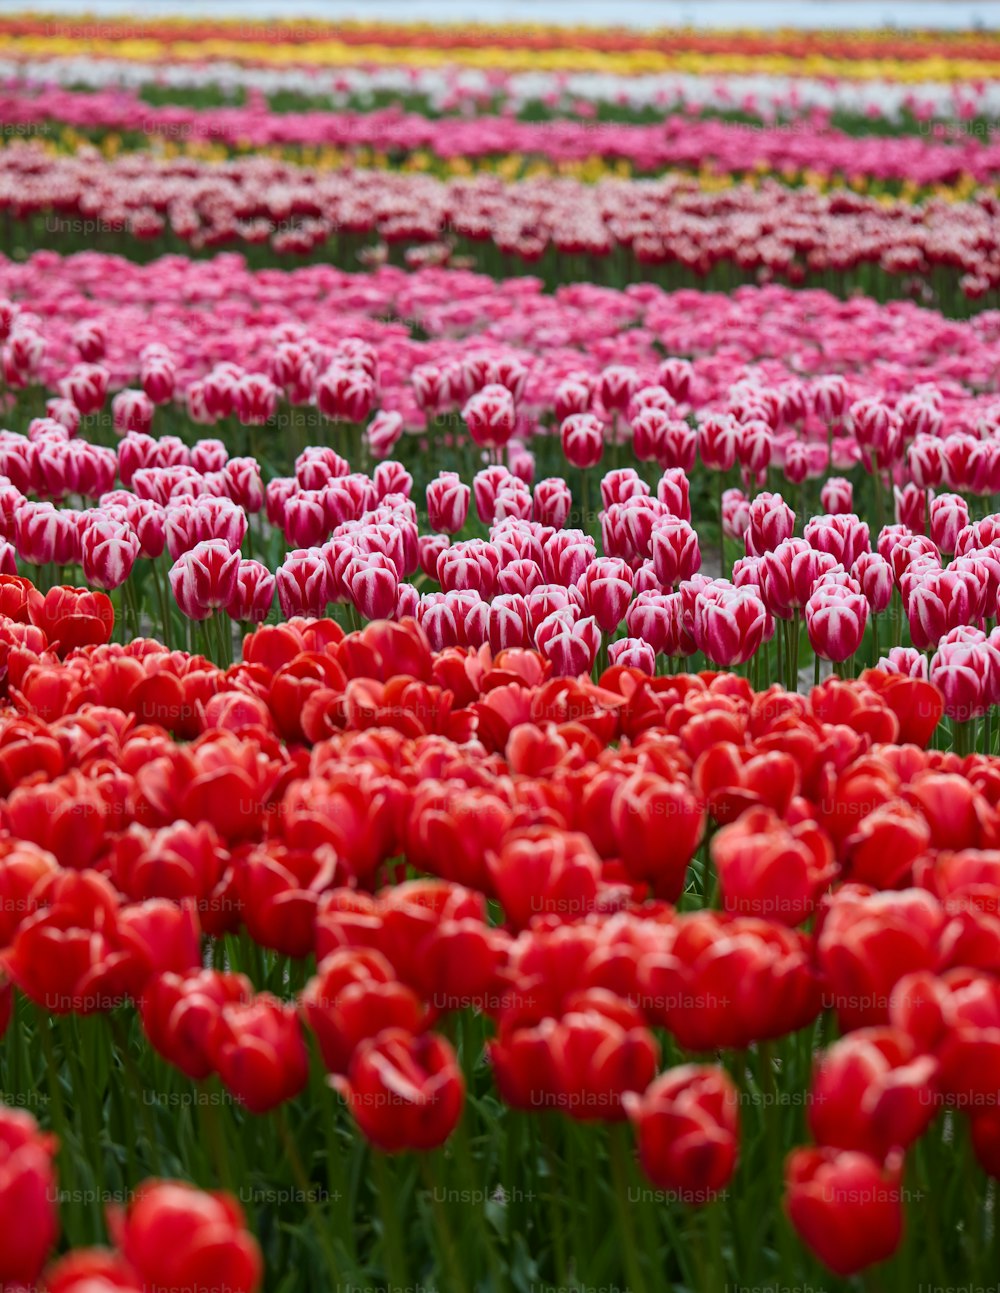 a field full of red and white tulips